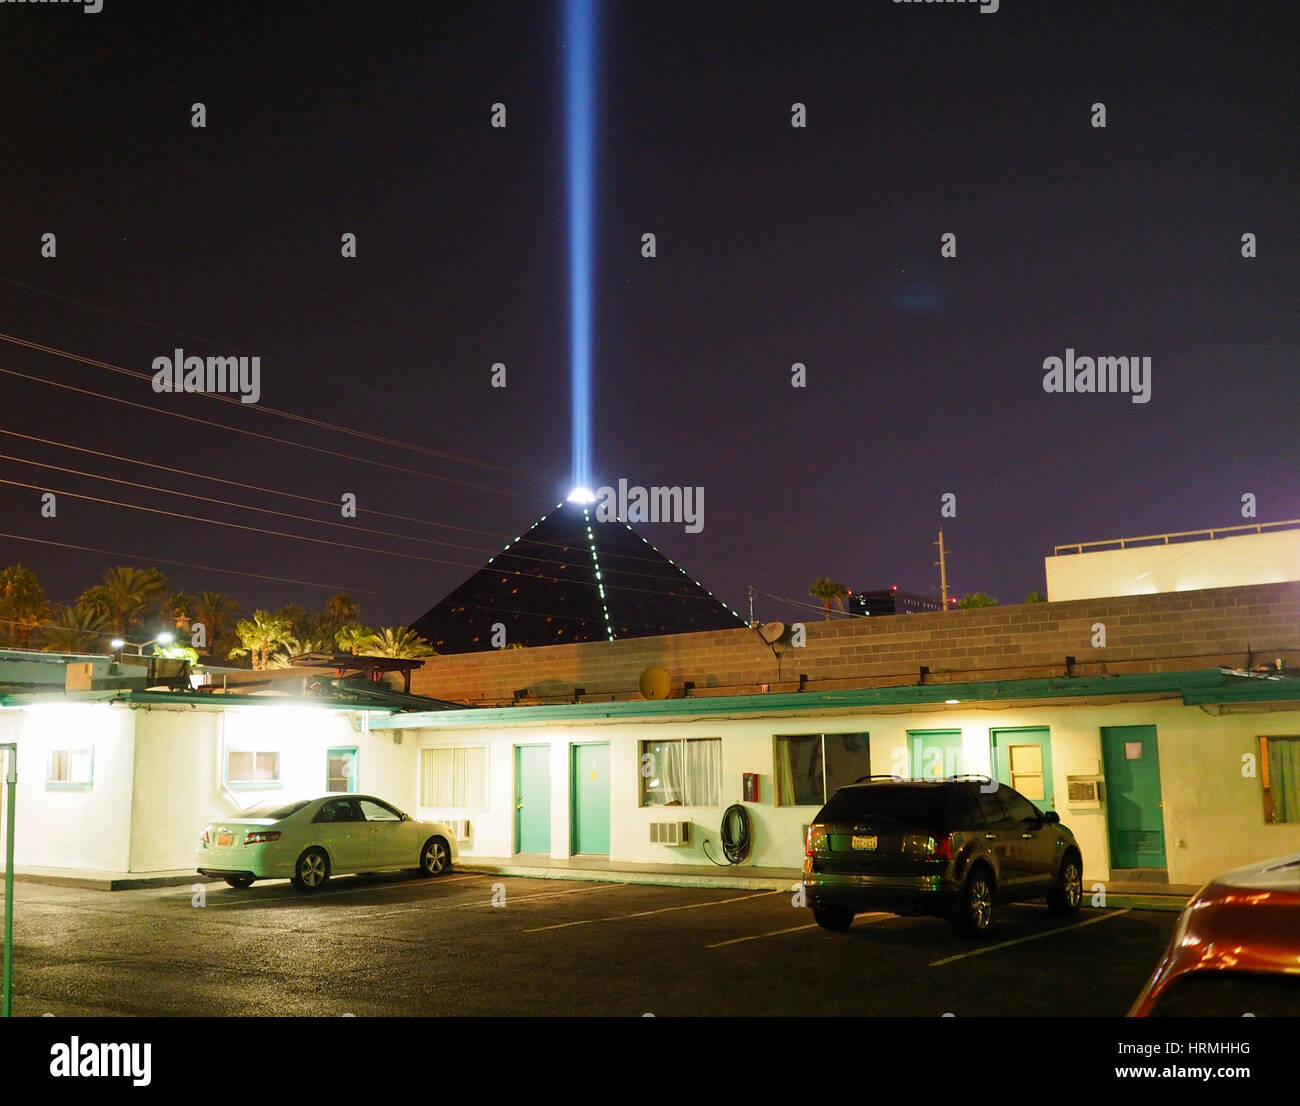 The bright light beam from the top of the 'Luxor' casino and hotel is visible in the Las Vegas sky behind the parking lot of a budeg motel far off the Stock Photo